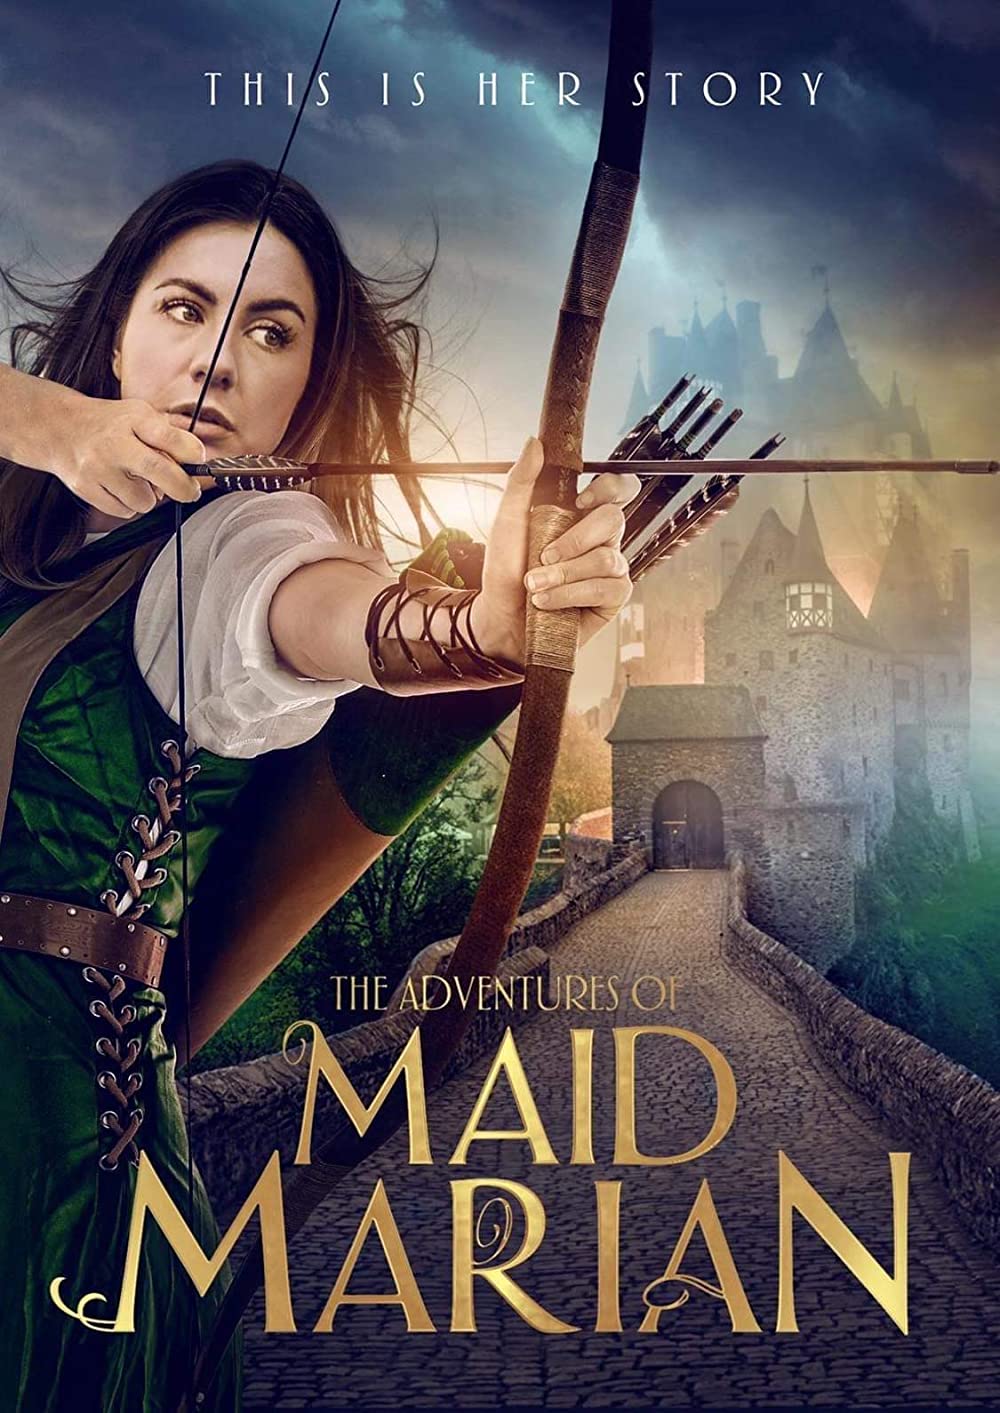 The Adventures of Maid Marian 2022 English Movie 480p HDRip 250MB Download